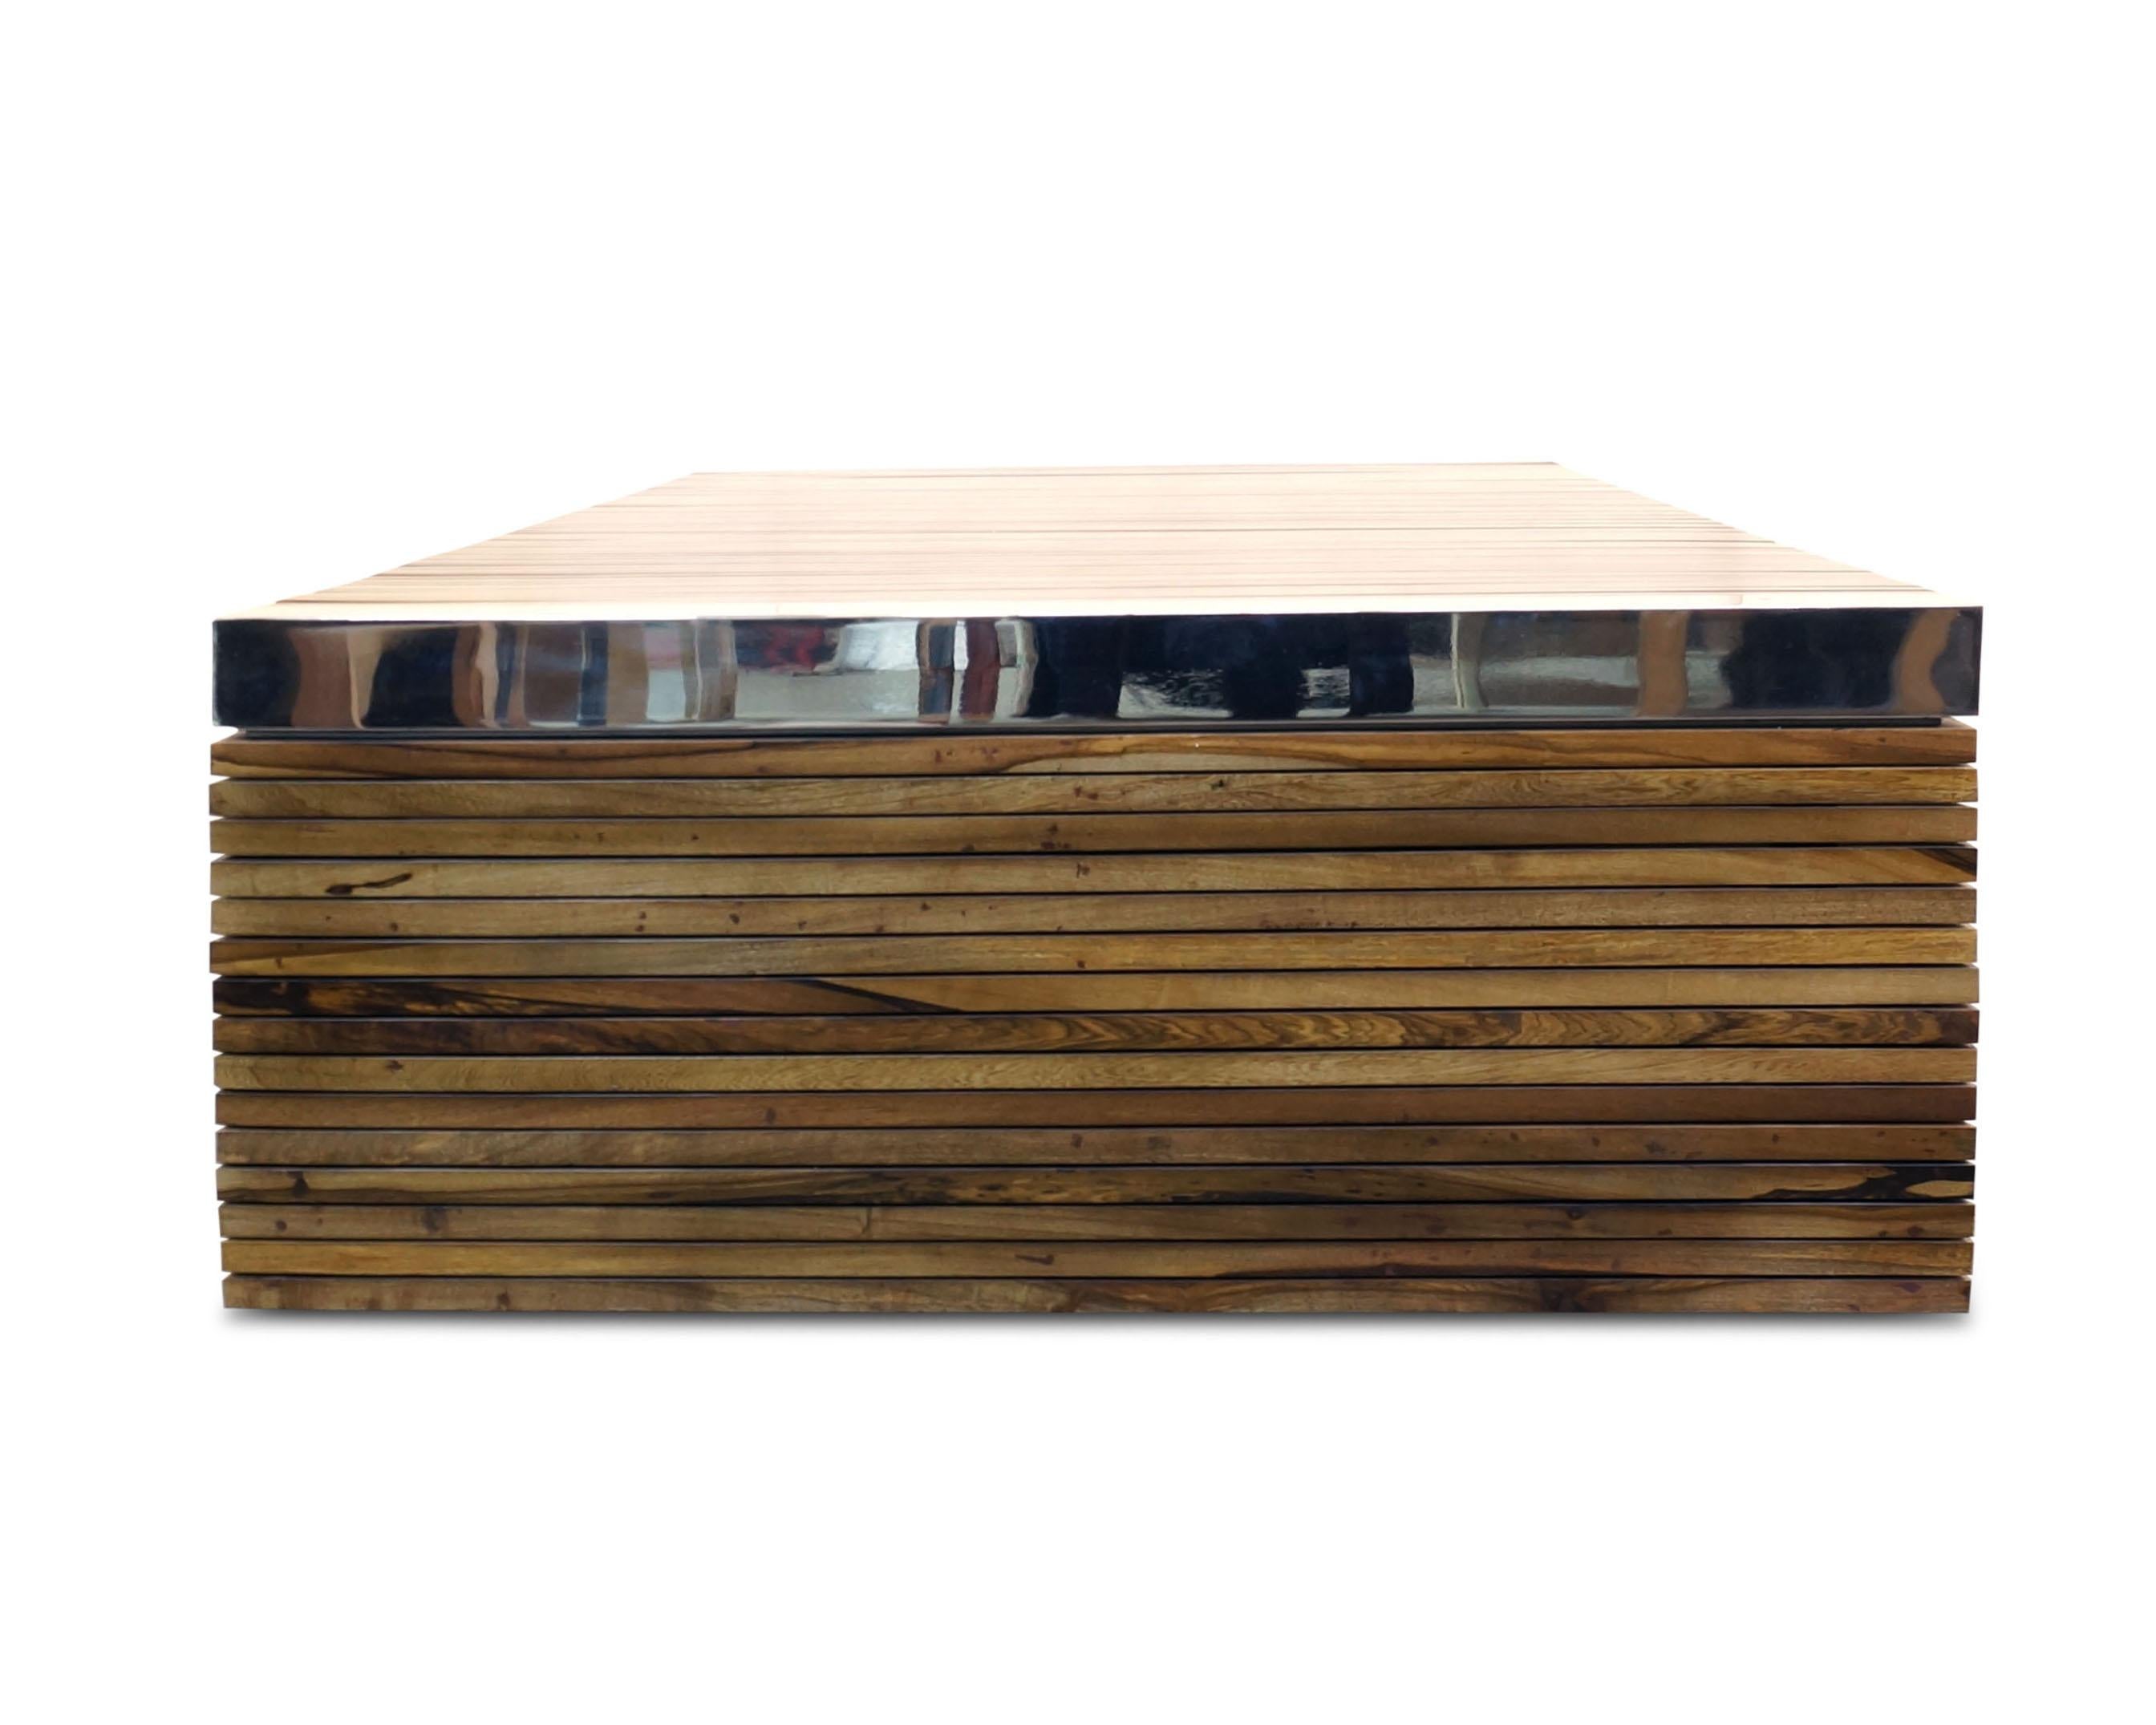 Argilla Coffee Table with Exotic Wood Slats and Nickel-Plated Details, In Stock

This particular table measures 36